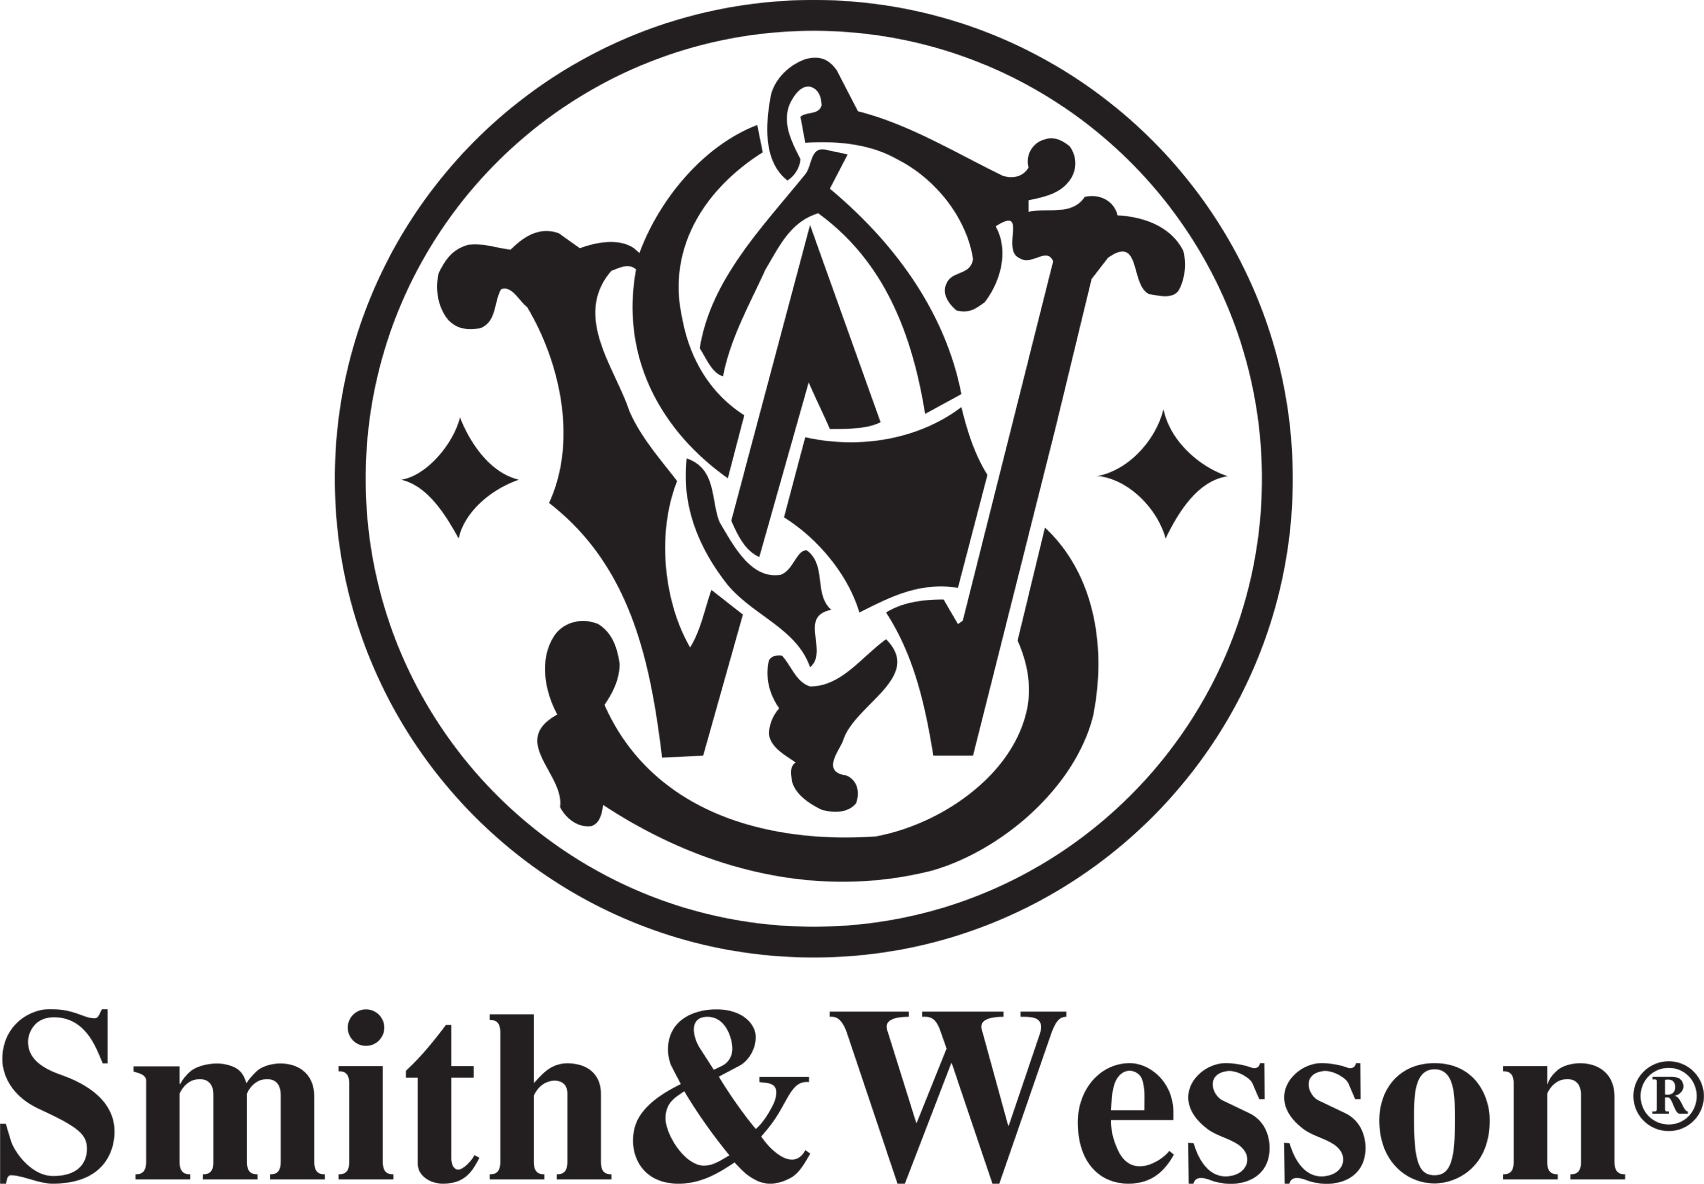 Smith & Wesson logo large (transparent PNG)